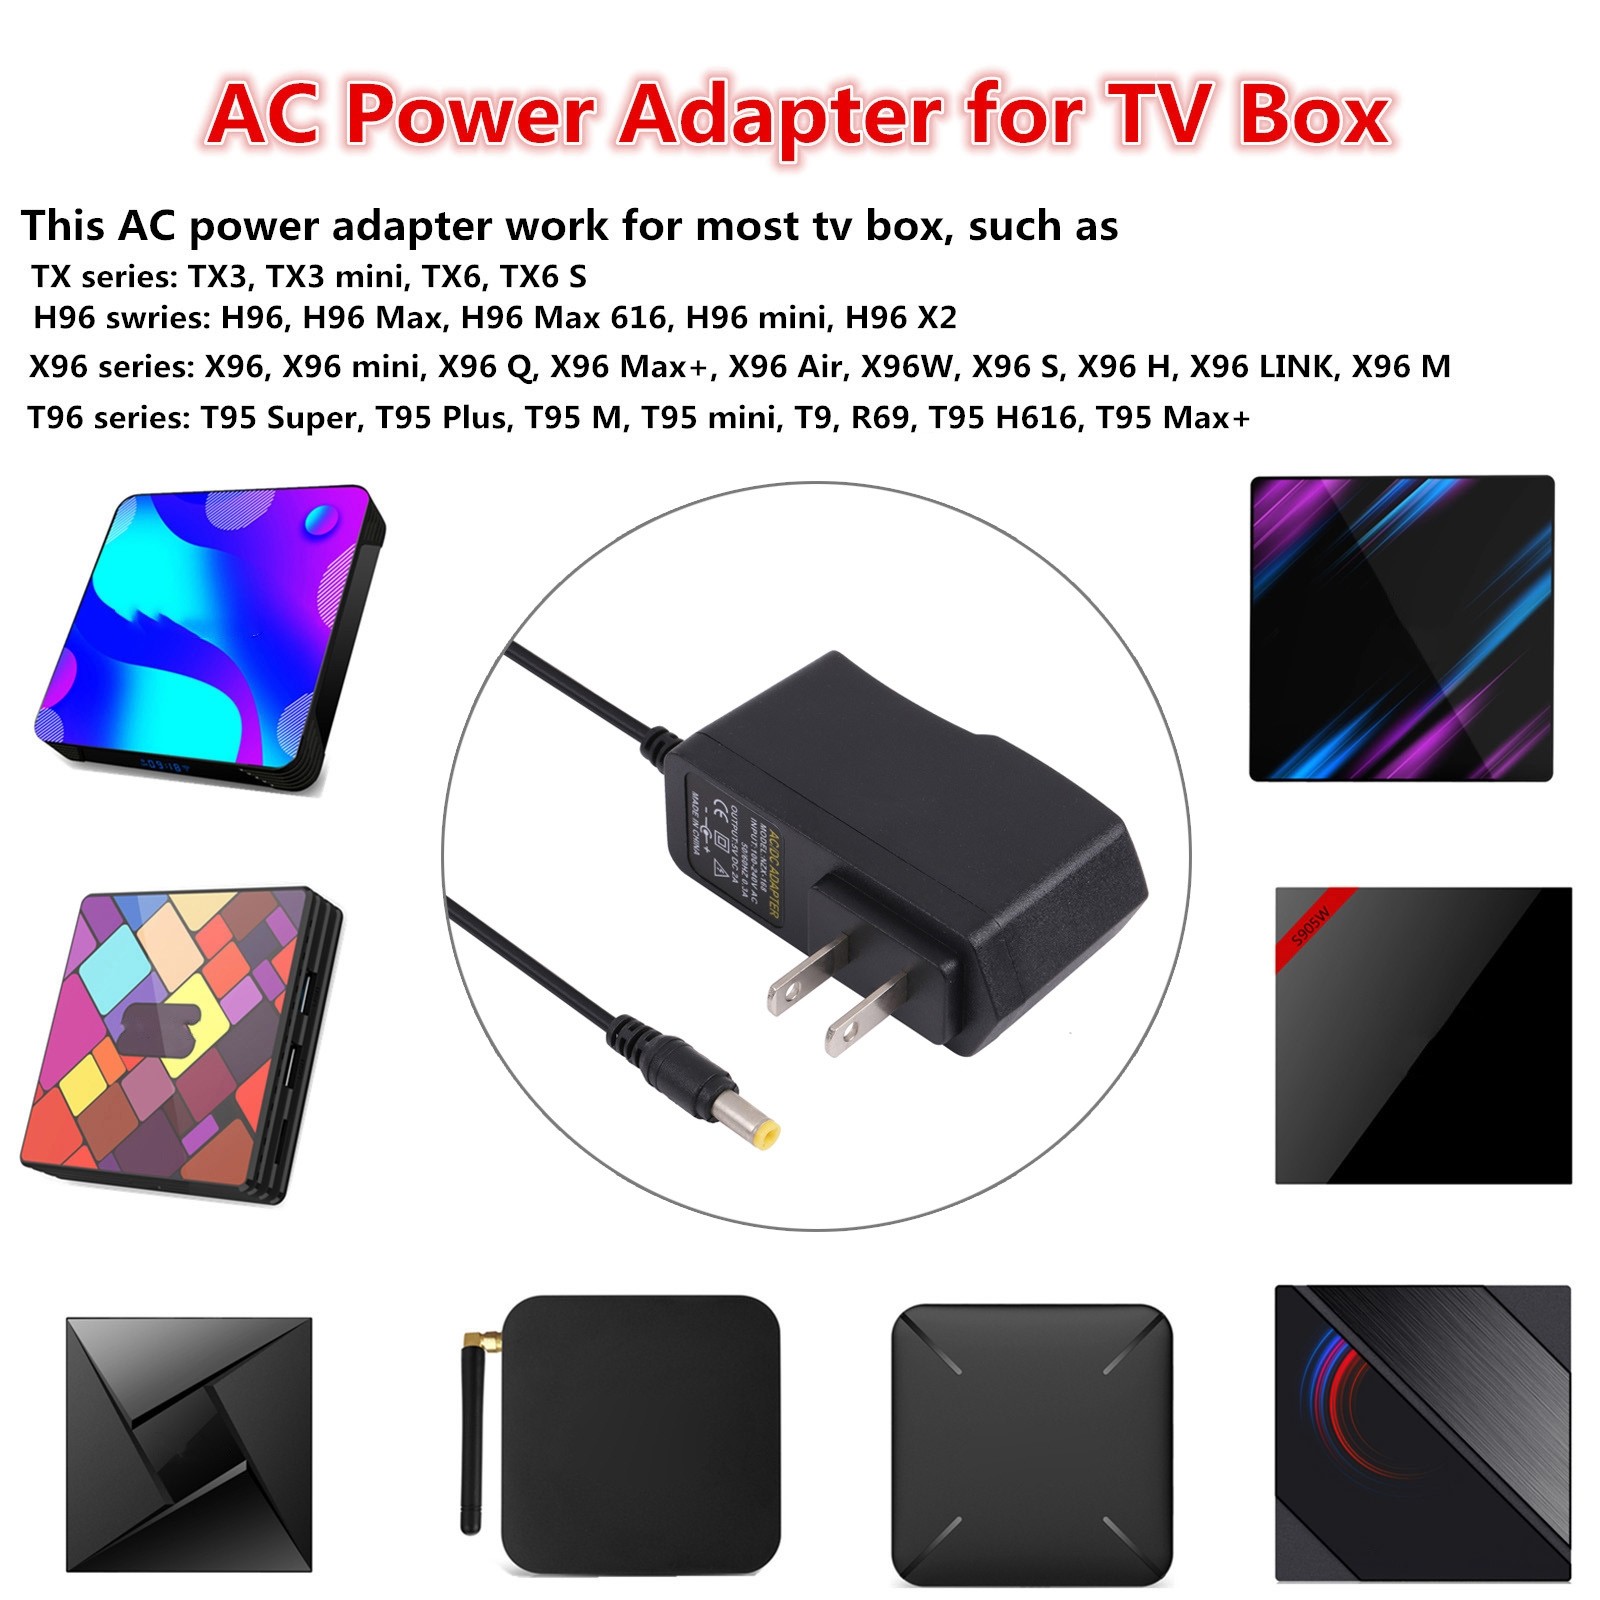 5V 2A 5.5x2.1mm Power Adapter for TV BOX, US Plug